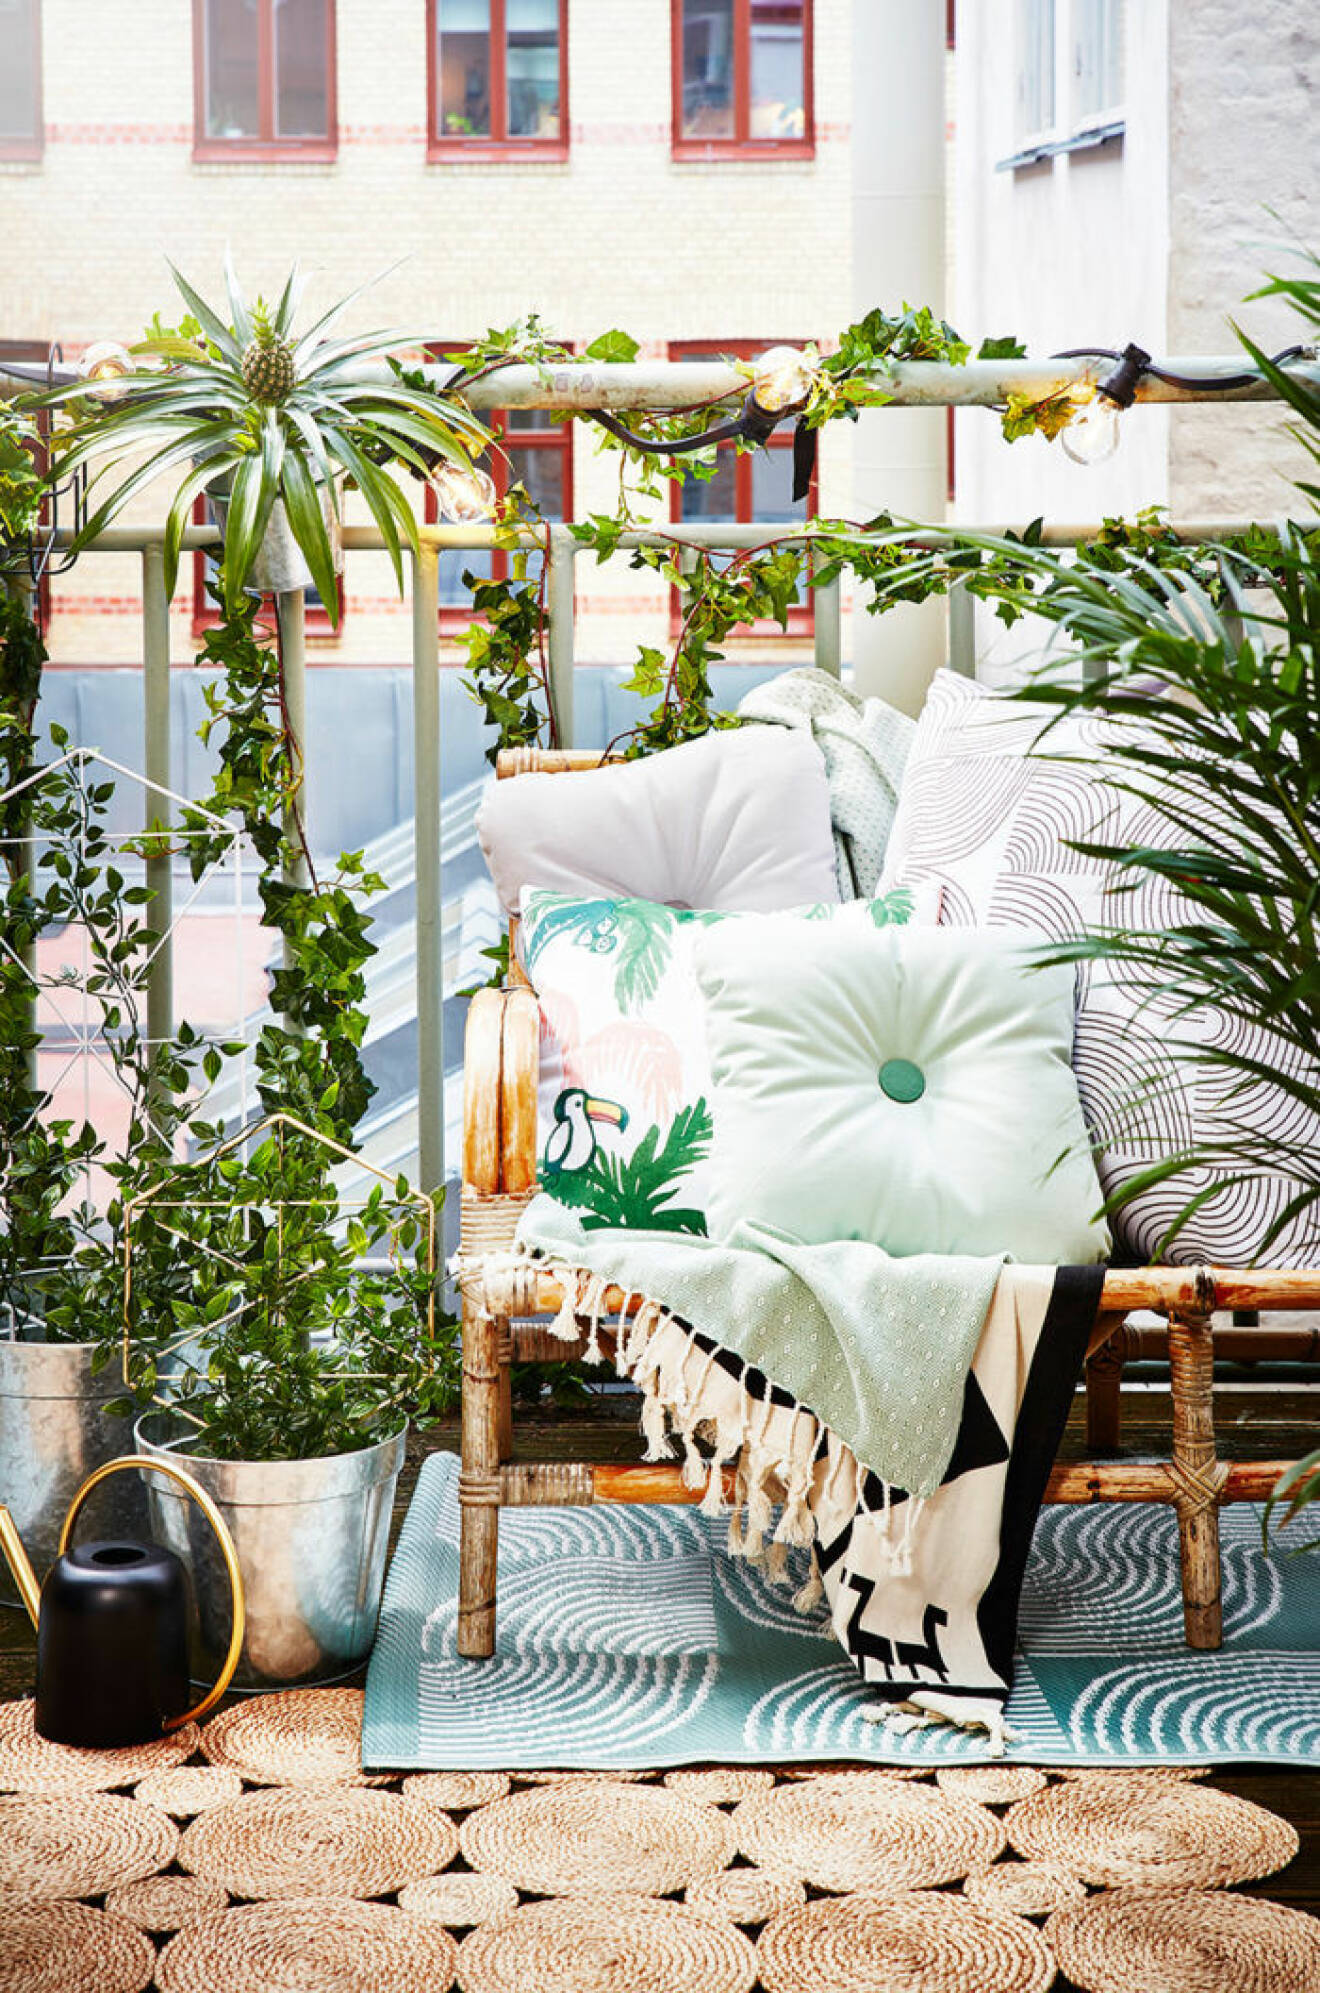 Summer balcony with plants and pillows.